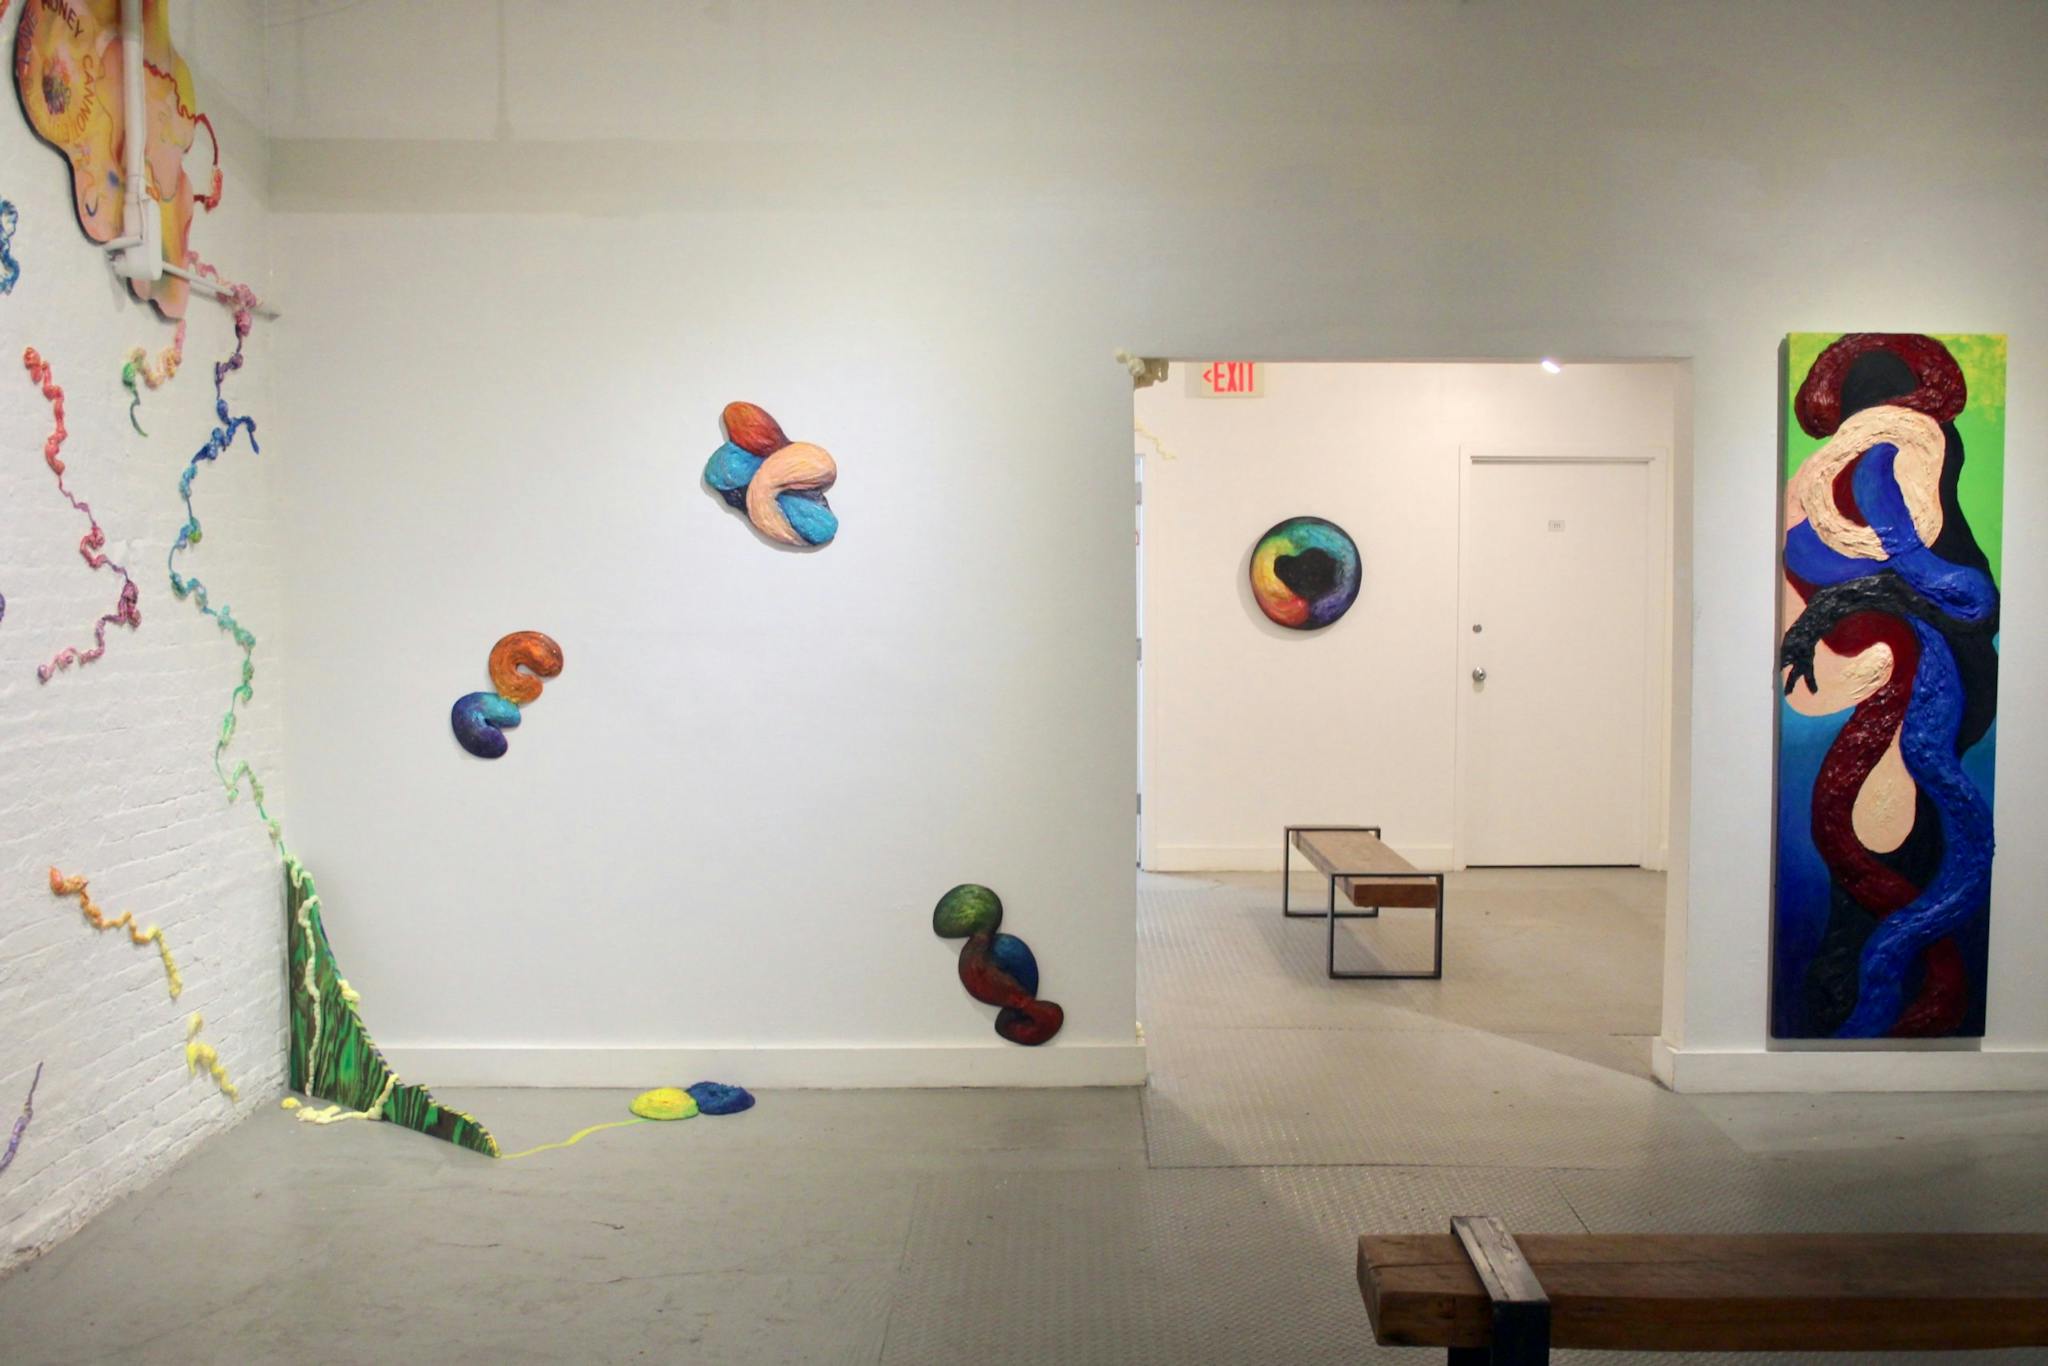 Colorful works adorn the white walls in Sunny Moxin Chen's installation.